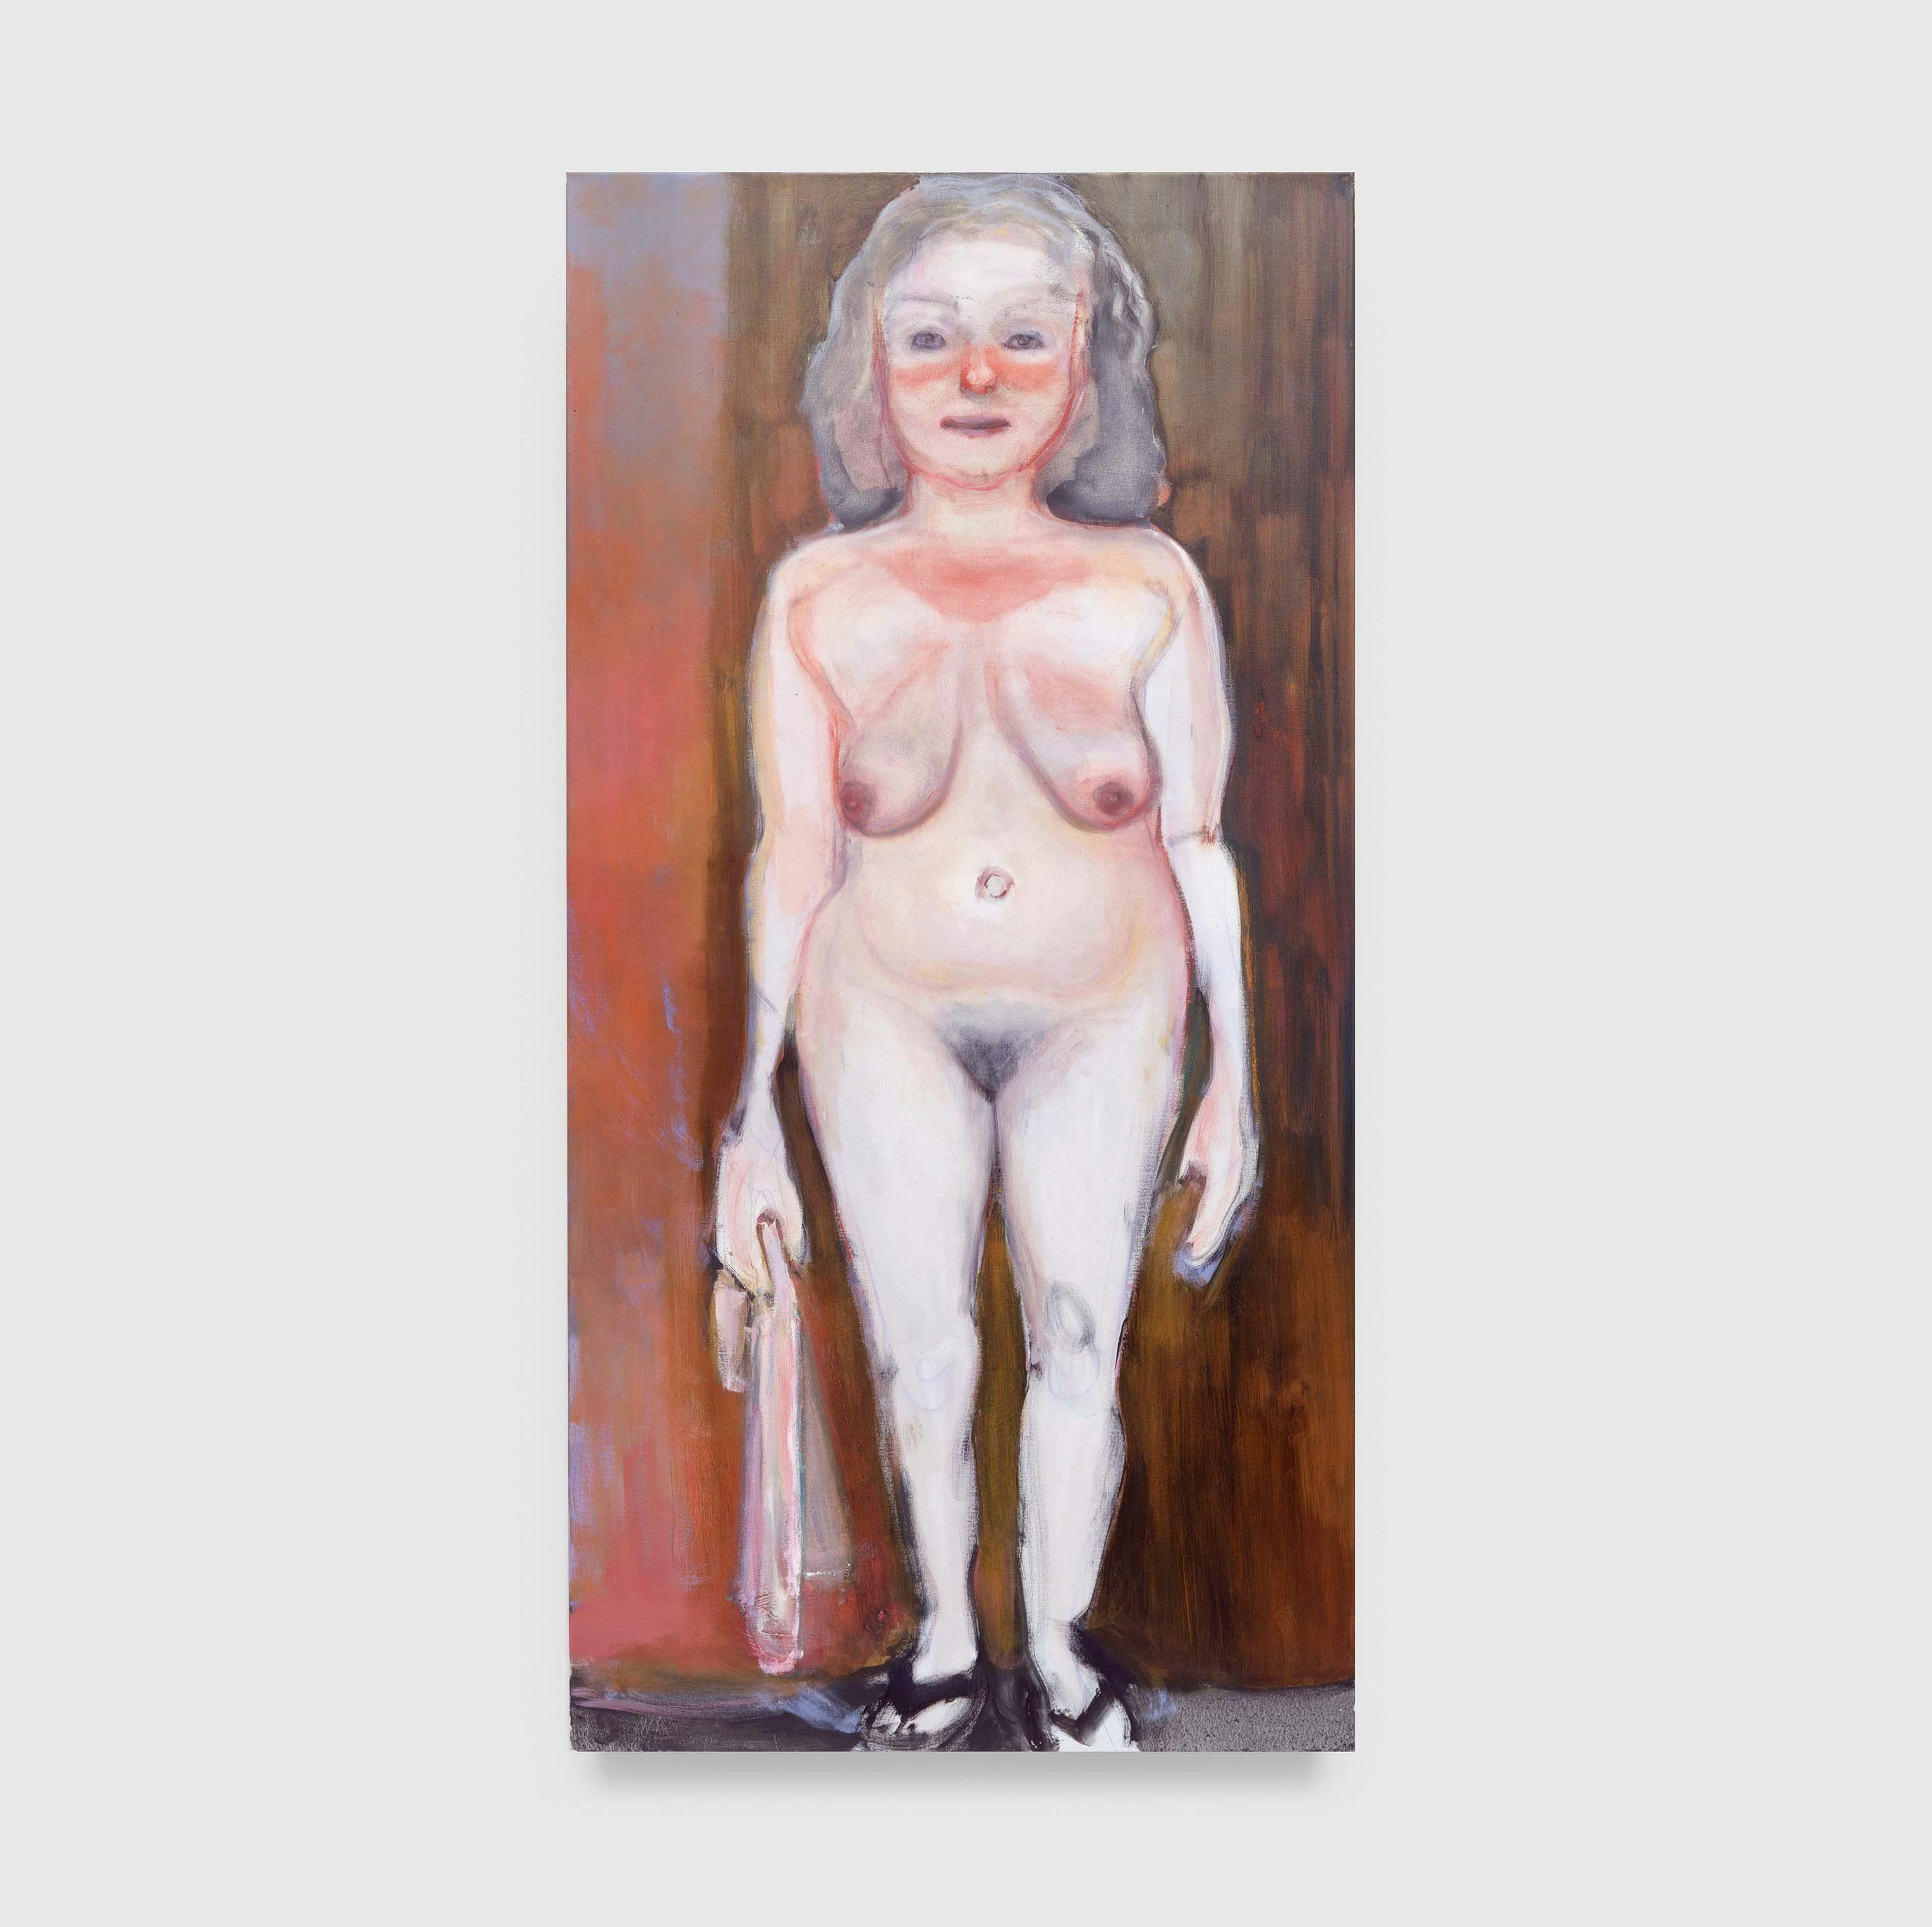 A painting by Marlene Dumas, titled Drunk, dated 1997.